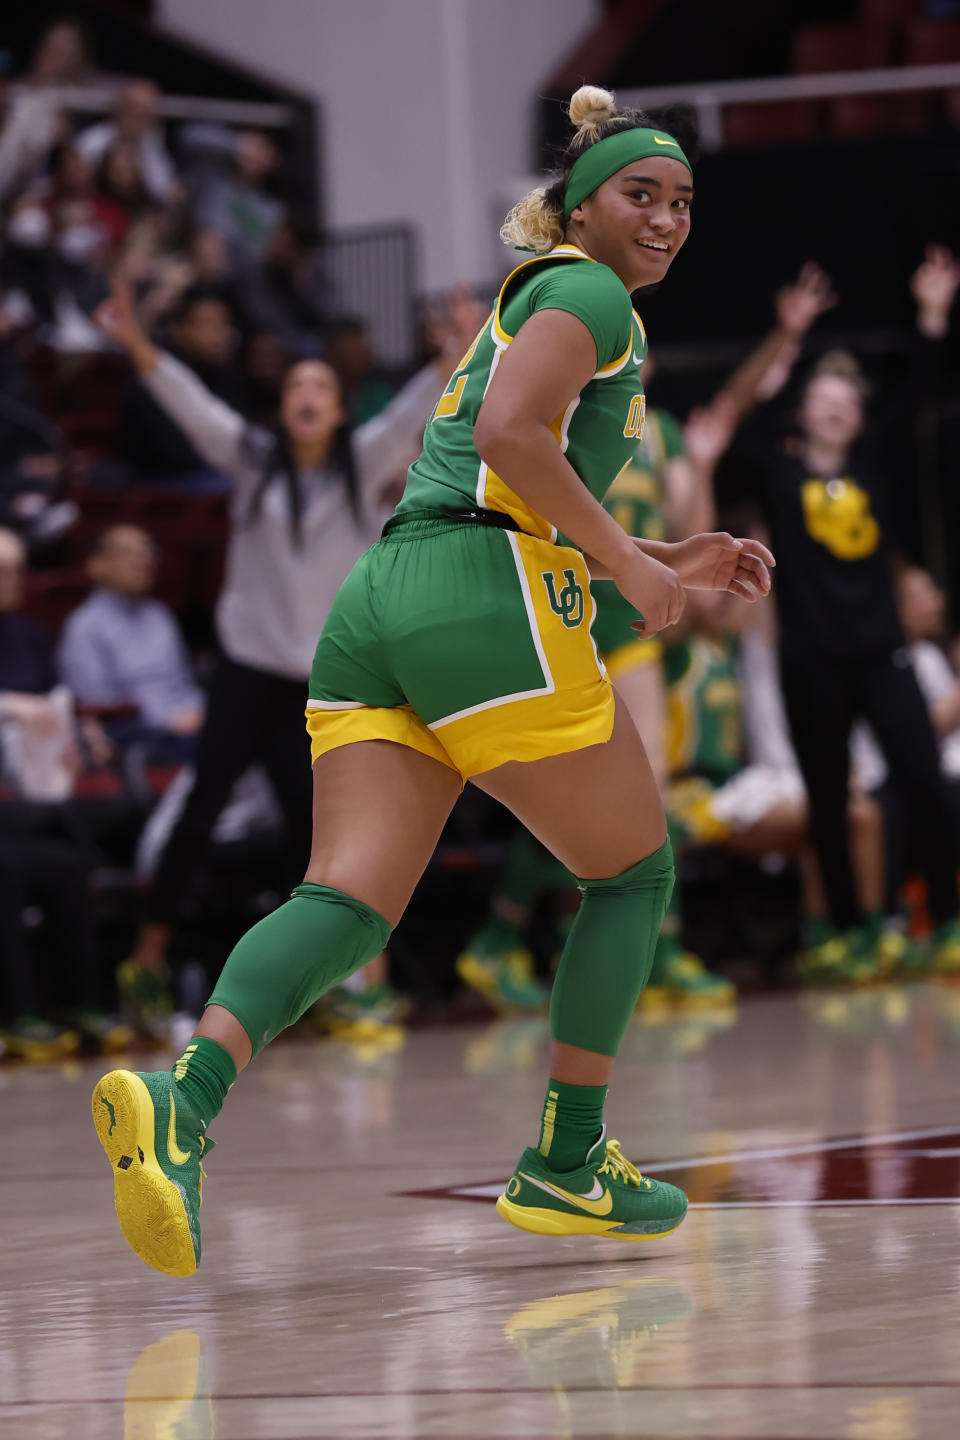 Oregon guard Te-Hina Paopao reacts after scoring a three pointer during the first half of an NCAA college basketball game against Stanford on Sunday, Jan. 29, 2023, in Stanford, Calif. (AP Photo/Josie Lepe)